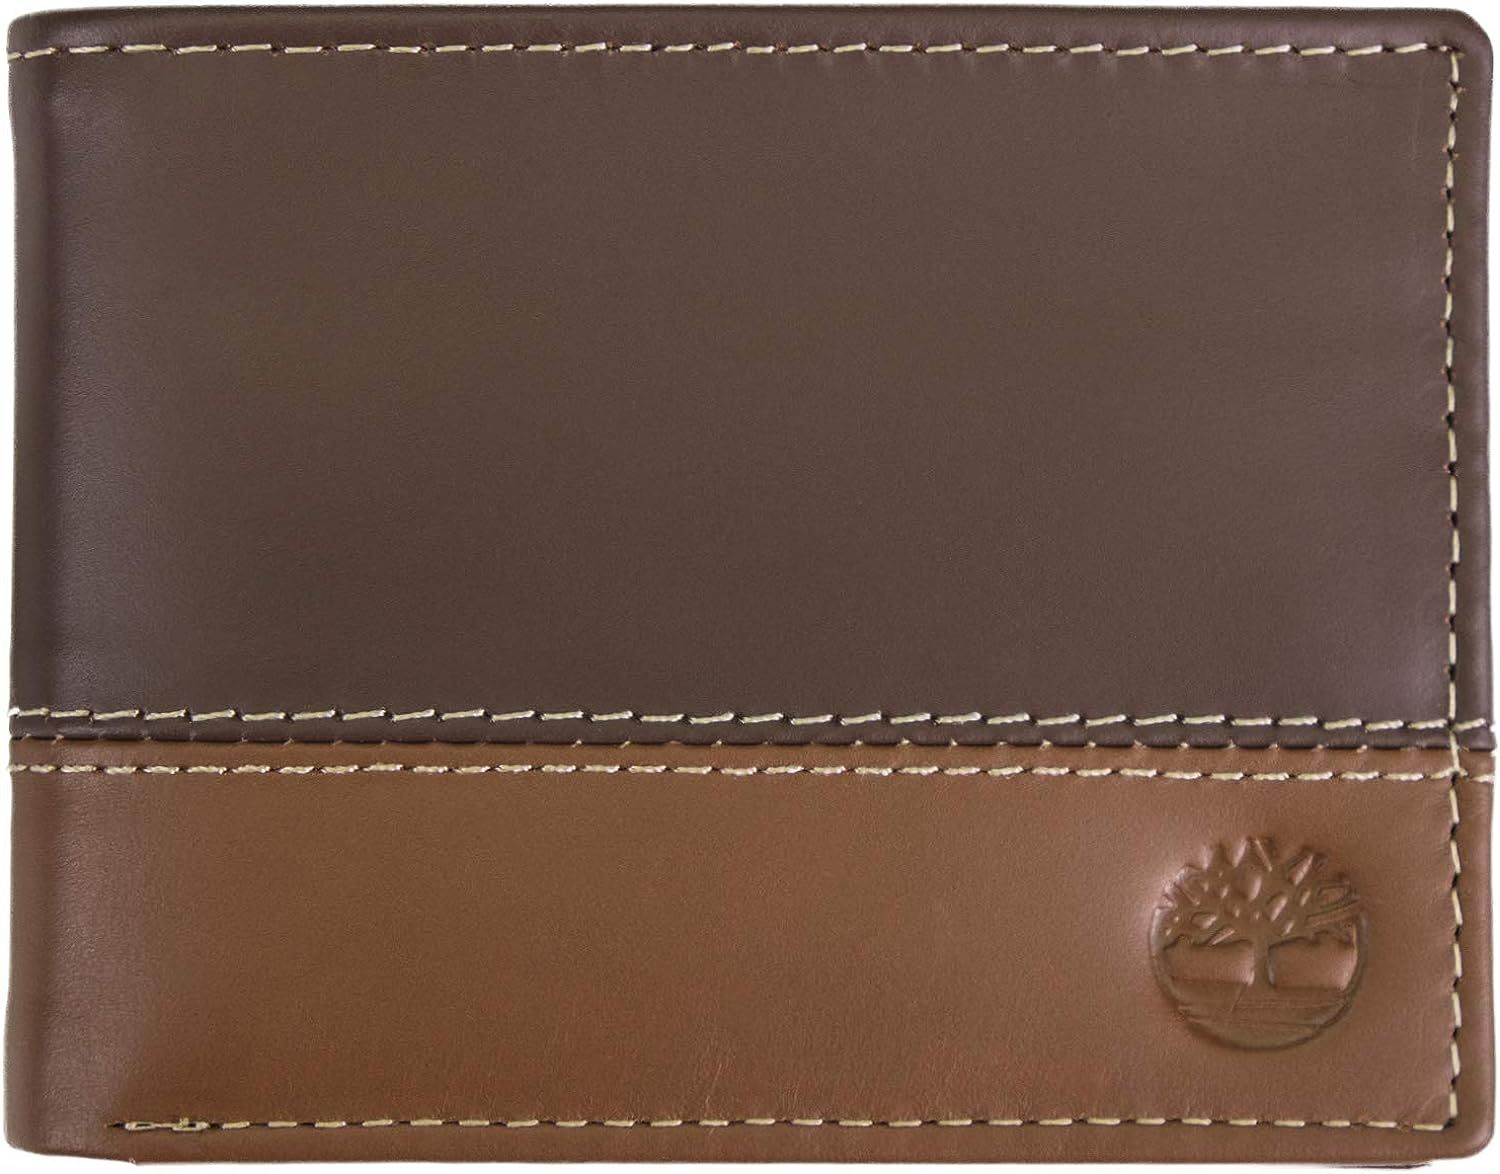 Timberland mens Leather Trifold Hybrid Passcase Wallet, Brown/Tan, One Size US at Amazon Men’s ... | Amazon (US)